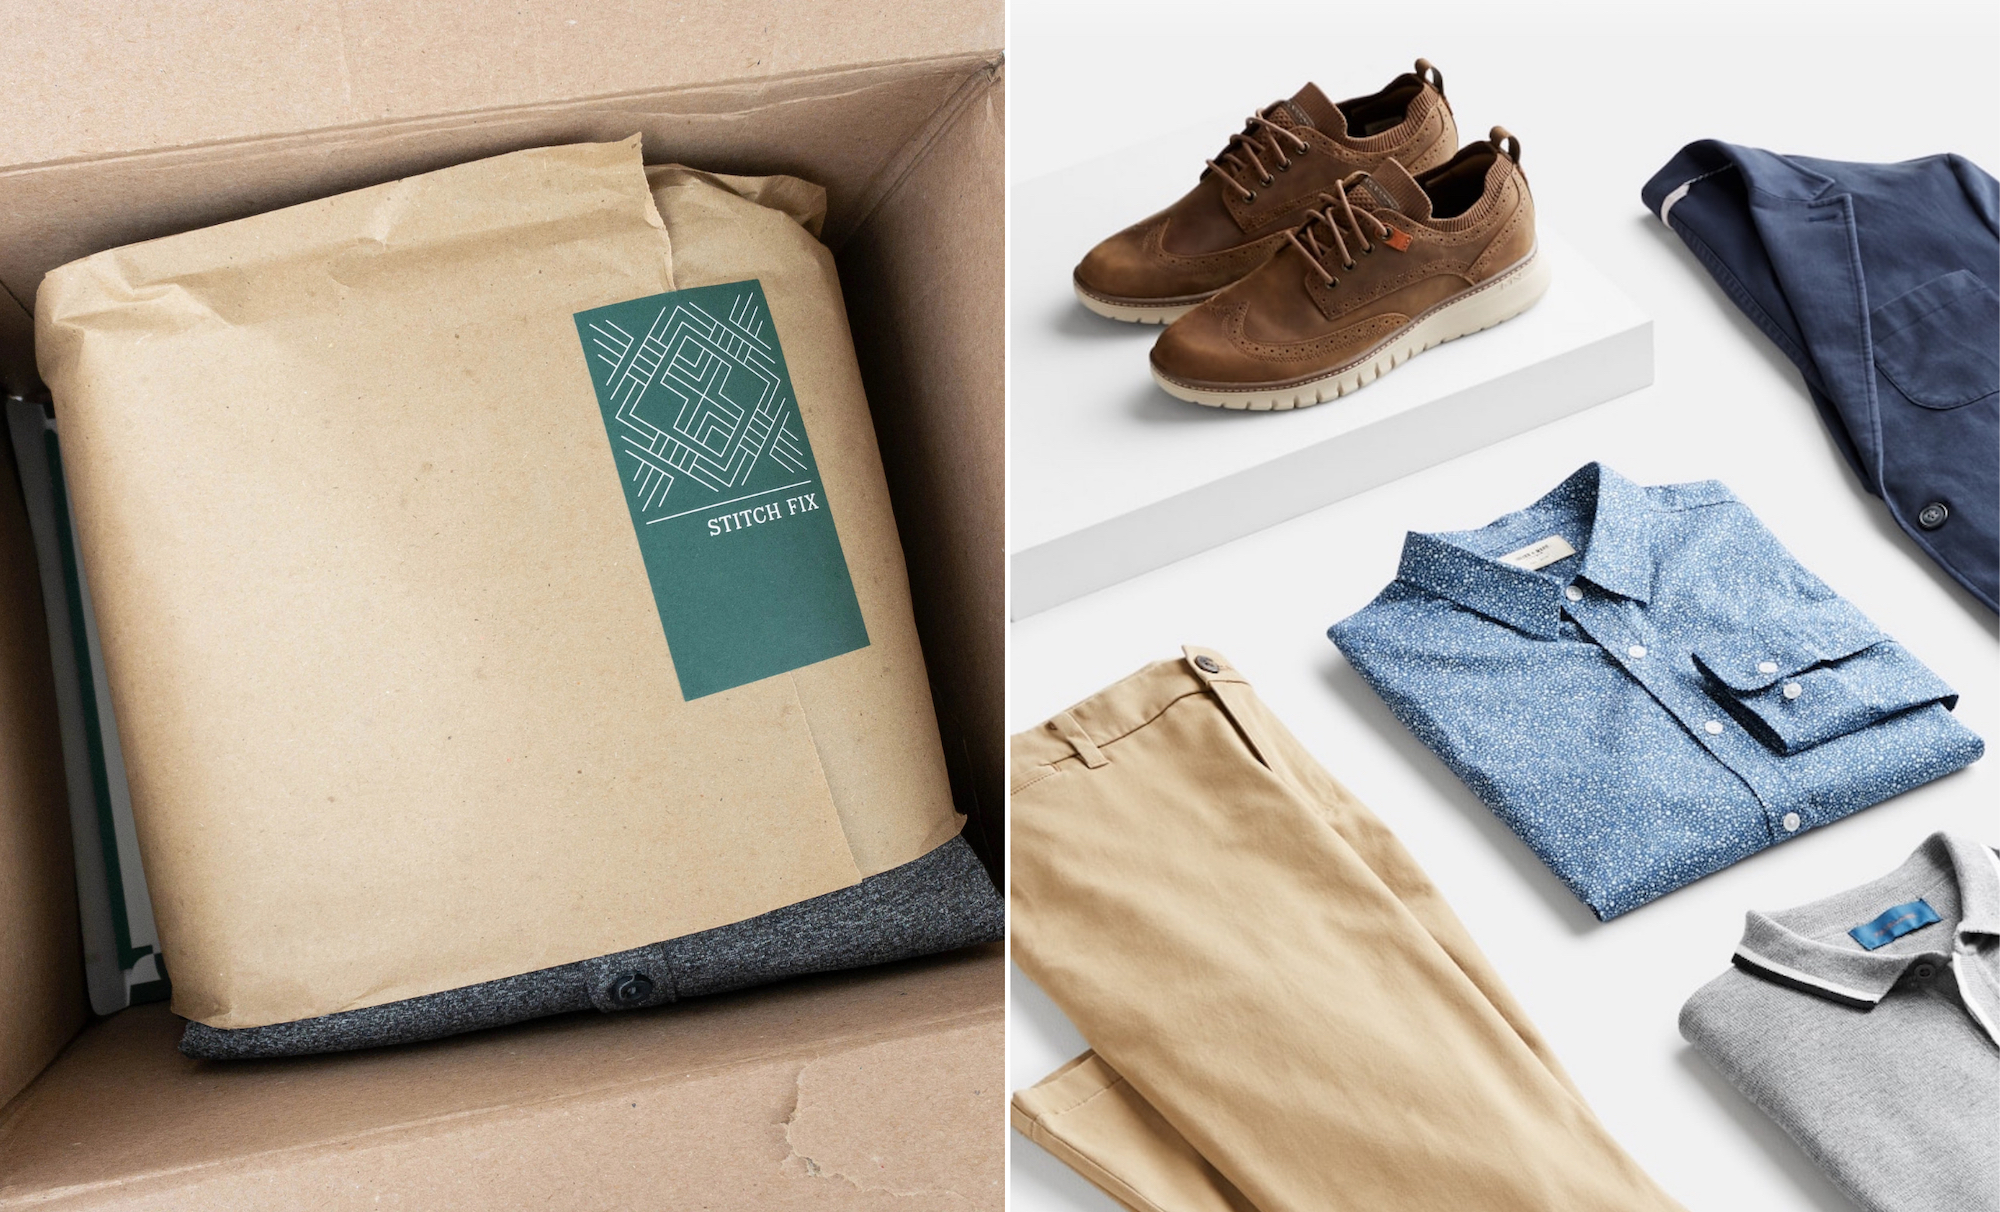 We Tried Stitch Fix for Men. Here's Our Honest-to-God Review - The